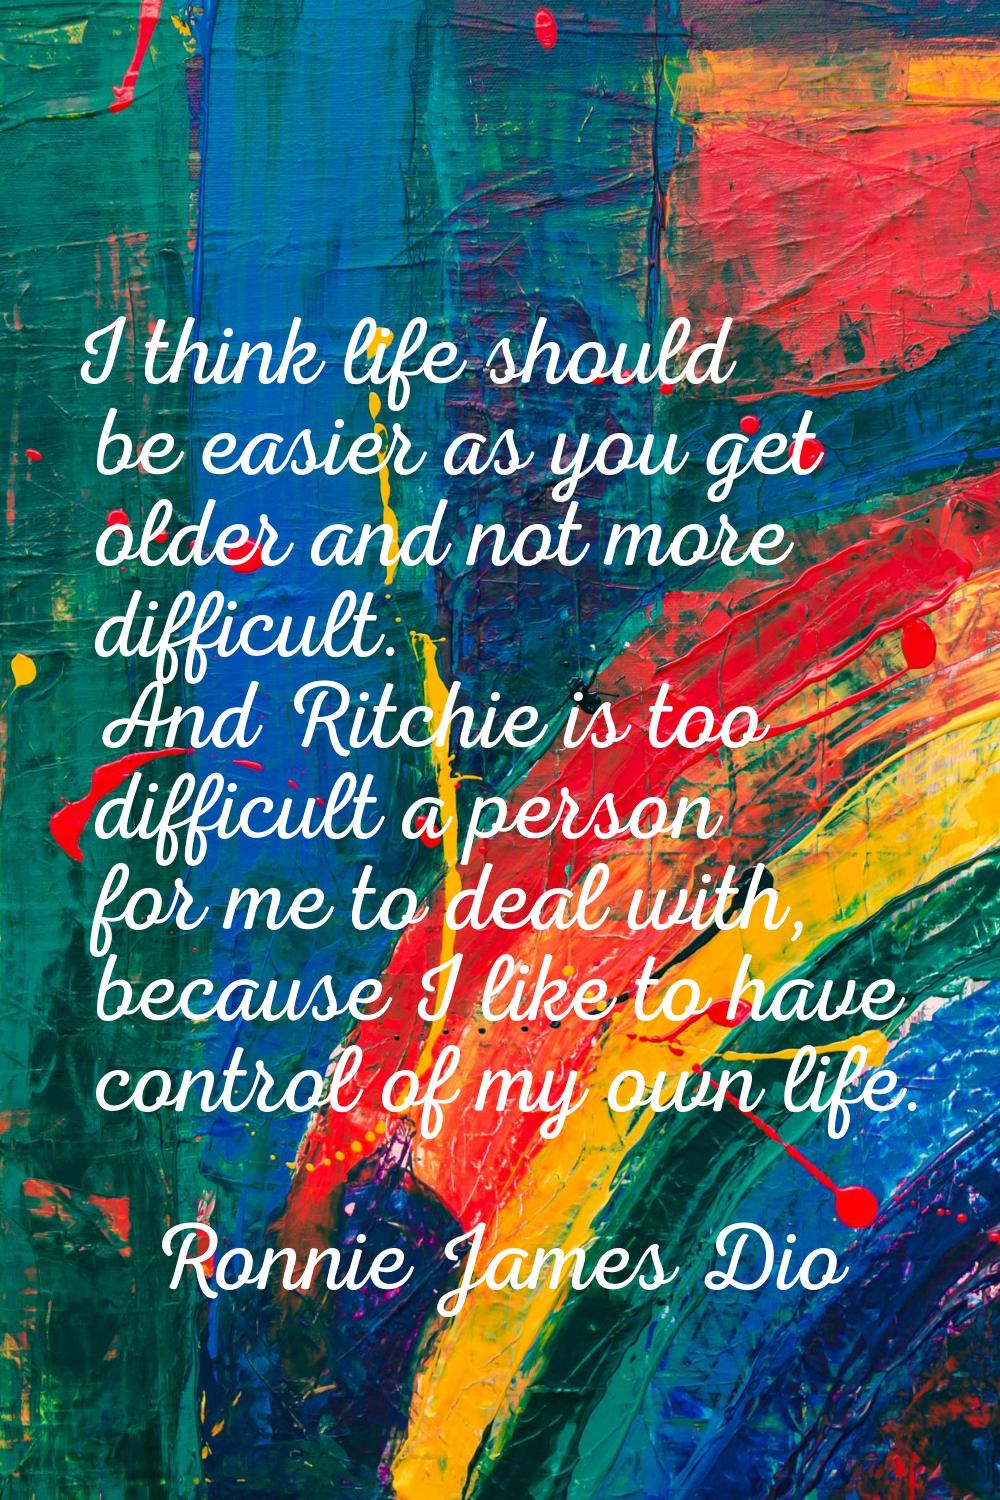 I think life should be easier as you get older and not more difficult. And Ritchie is too difficult